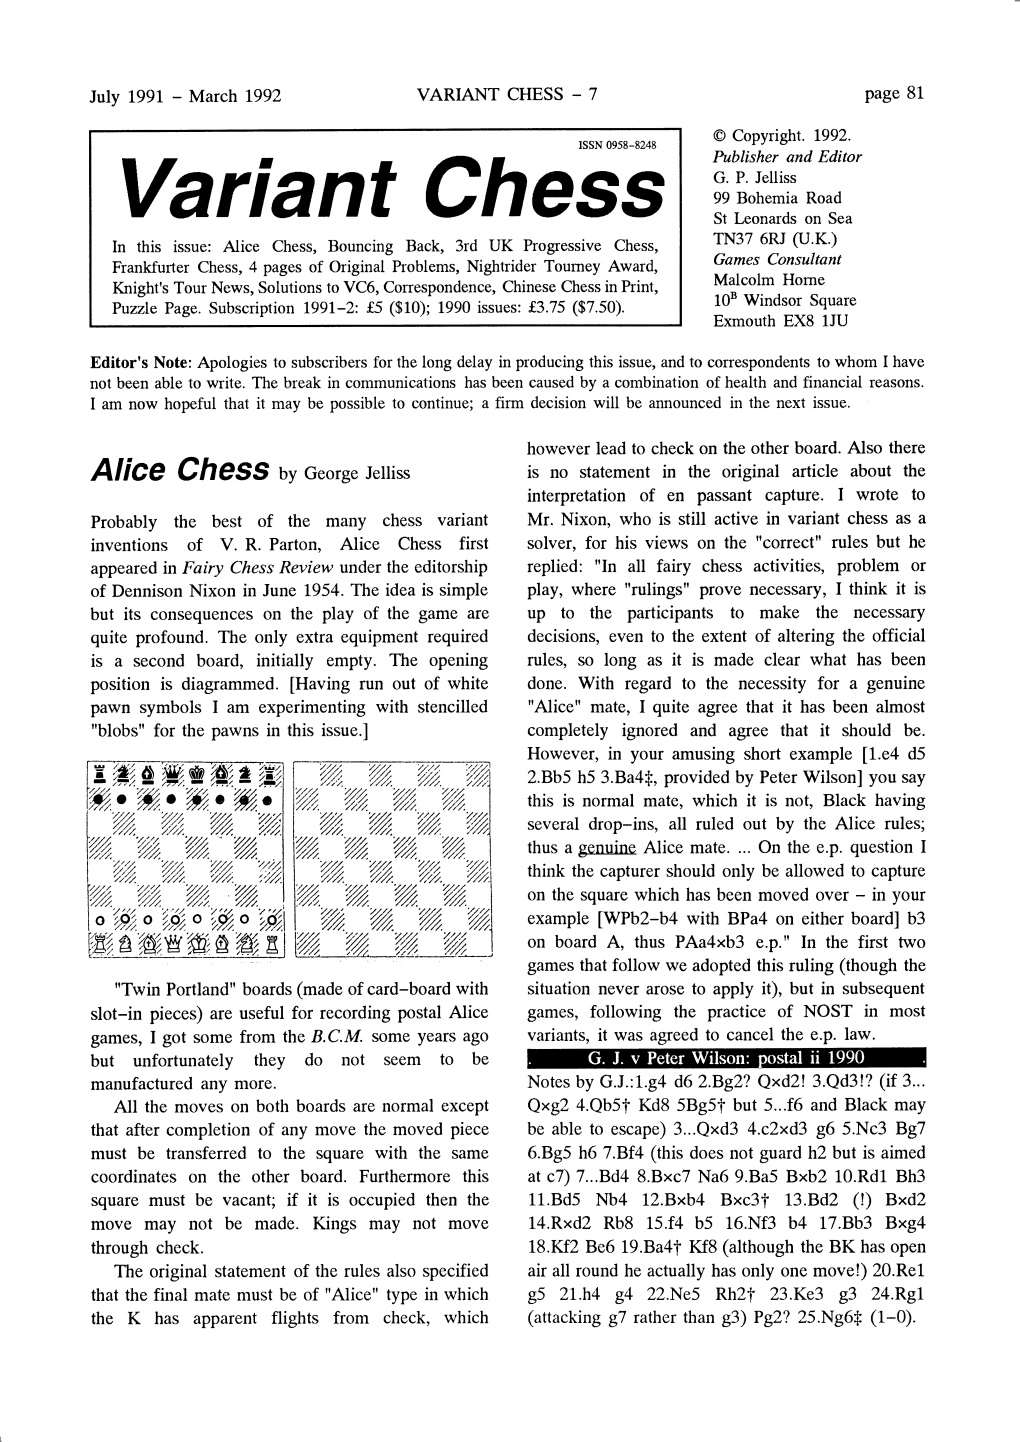 VARIANT CHESS 7 Page 81